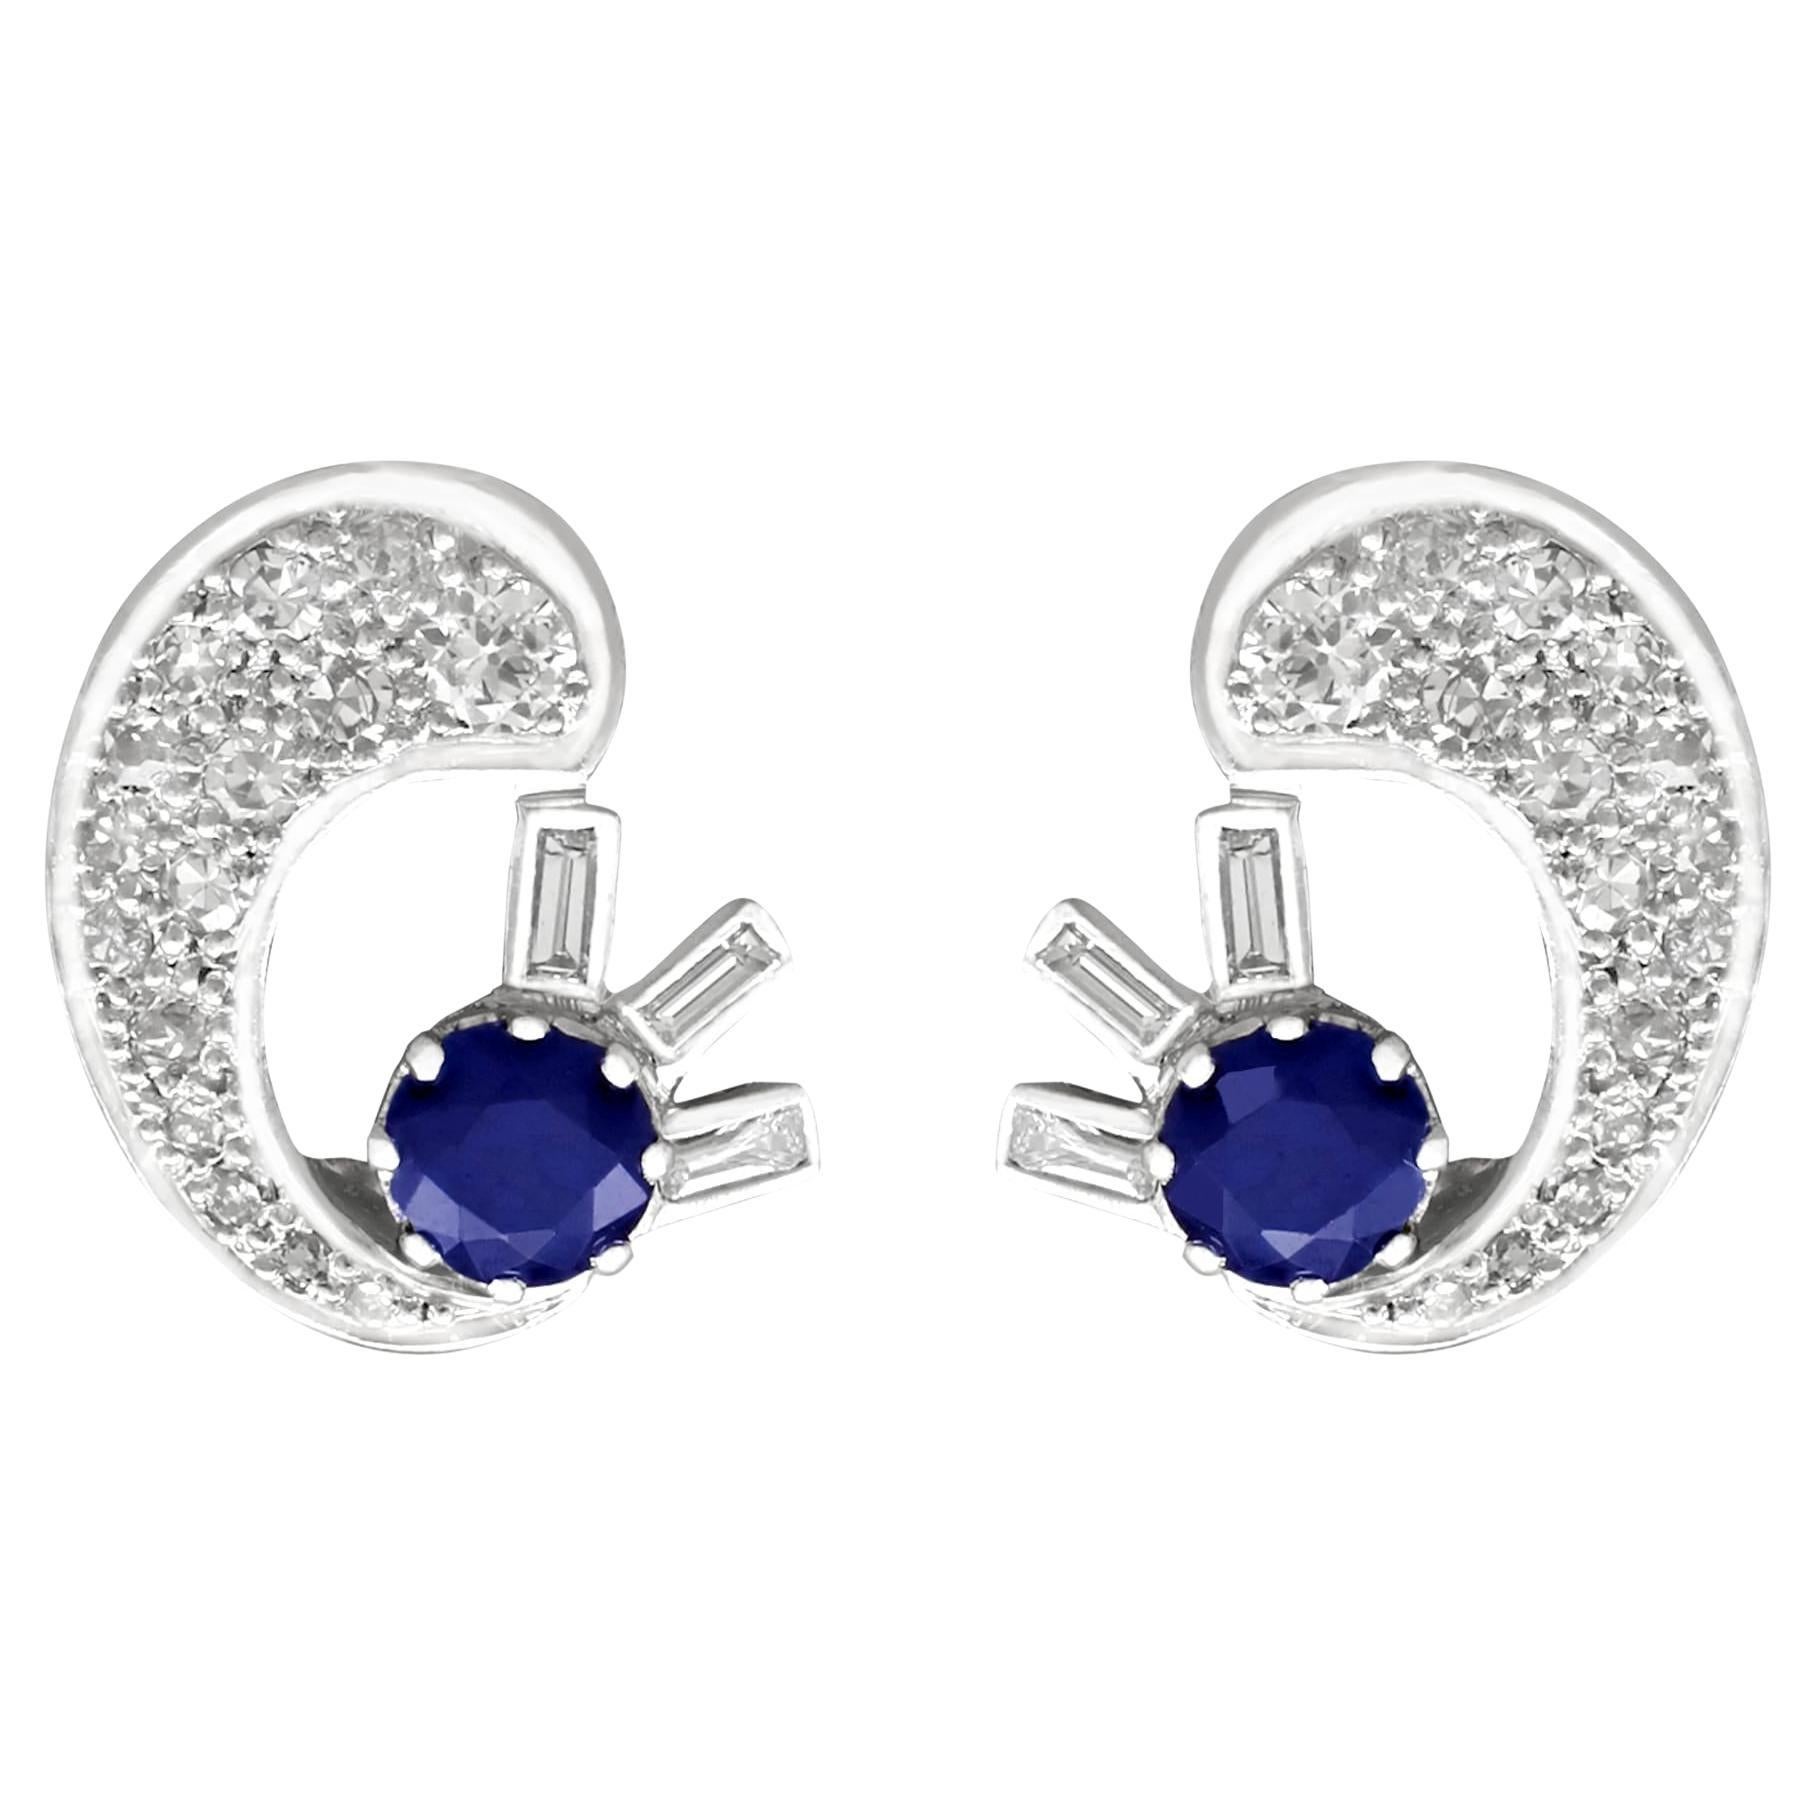 Antique 1.04 Carat Sapphire and 1.75 Carat Diamond White Gold Clip-on Earrings For Sale